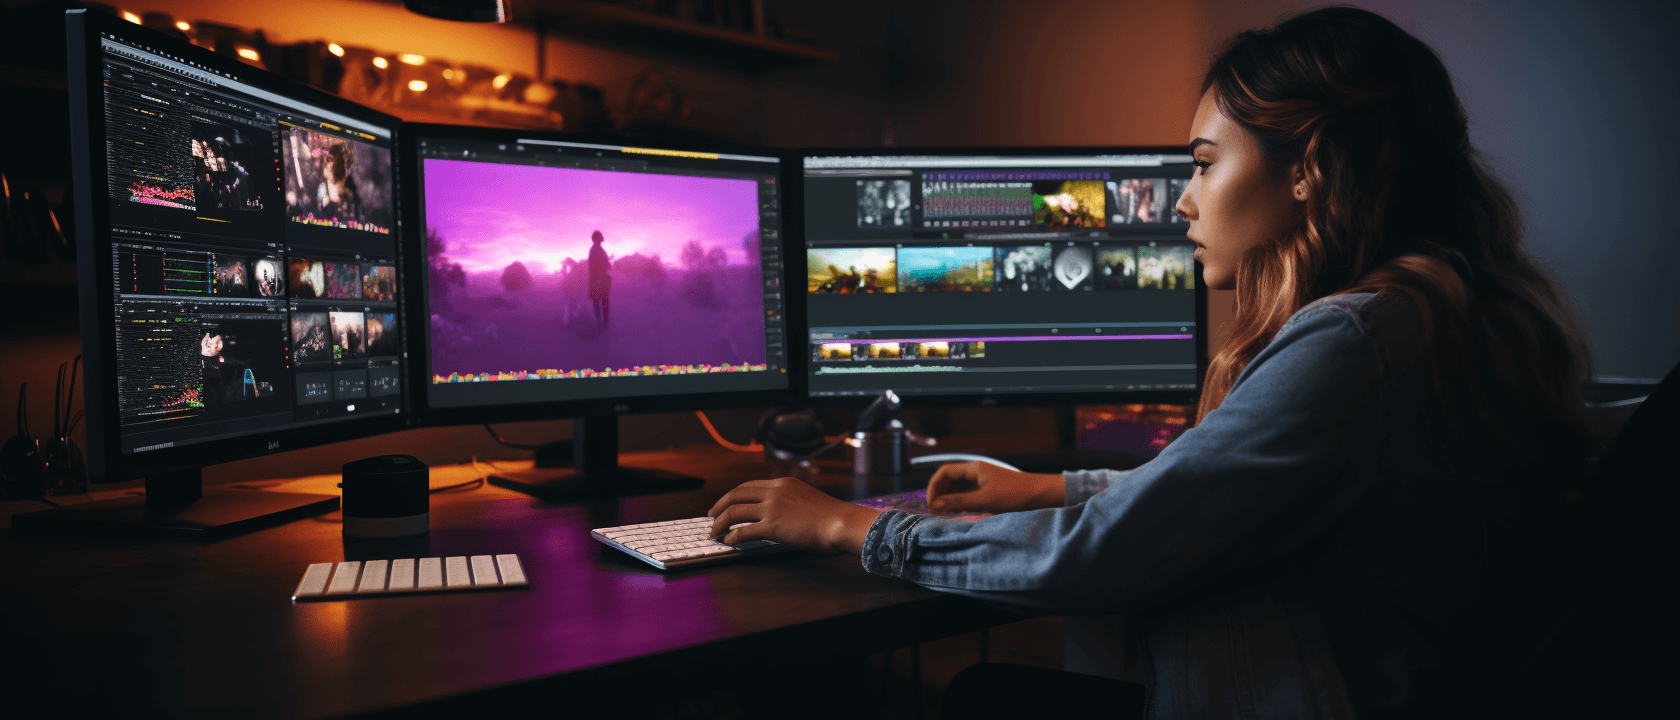 How to Make a YouTube Video in 2024: A Comprehensive Video Editing Guide